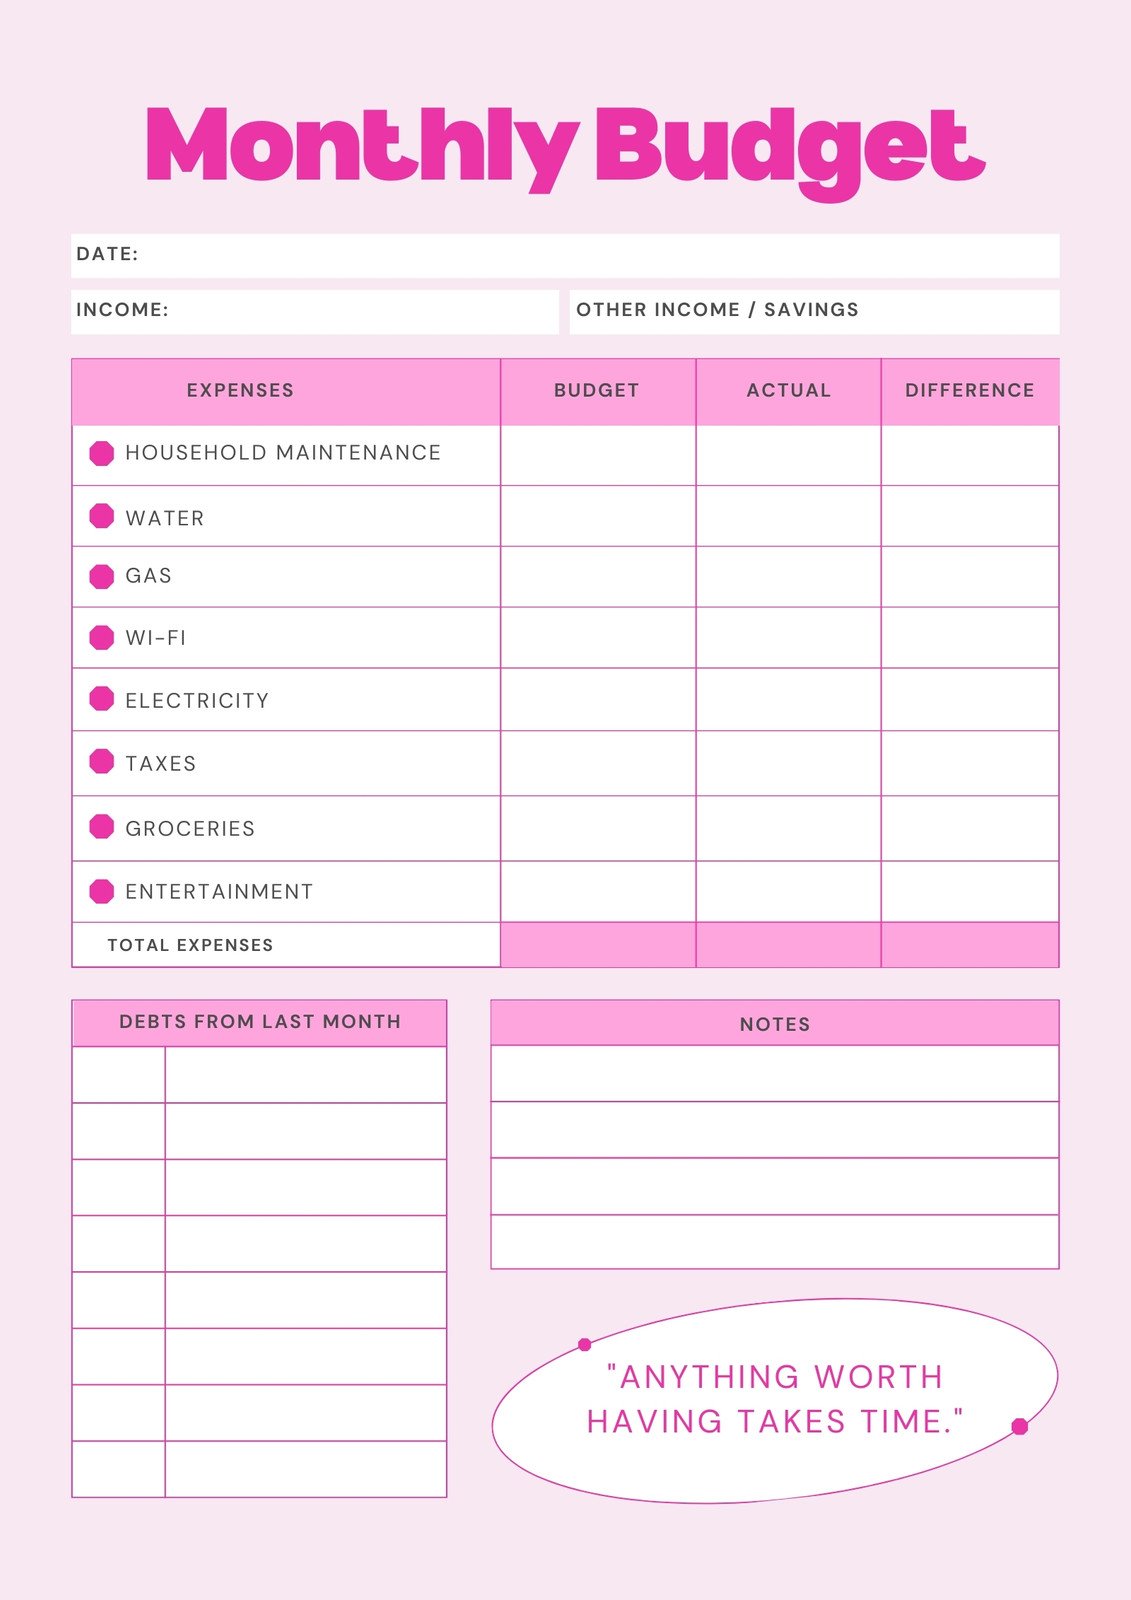 Printable Monthly Budget Planner, Budget Template, Finance Planner, Budget  Plan, Financial Journal, Monthly Budget Sheet, A4 and Letter 